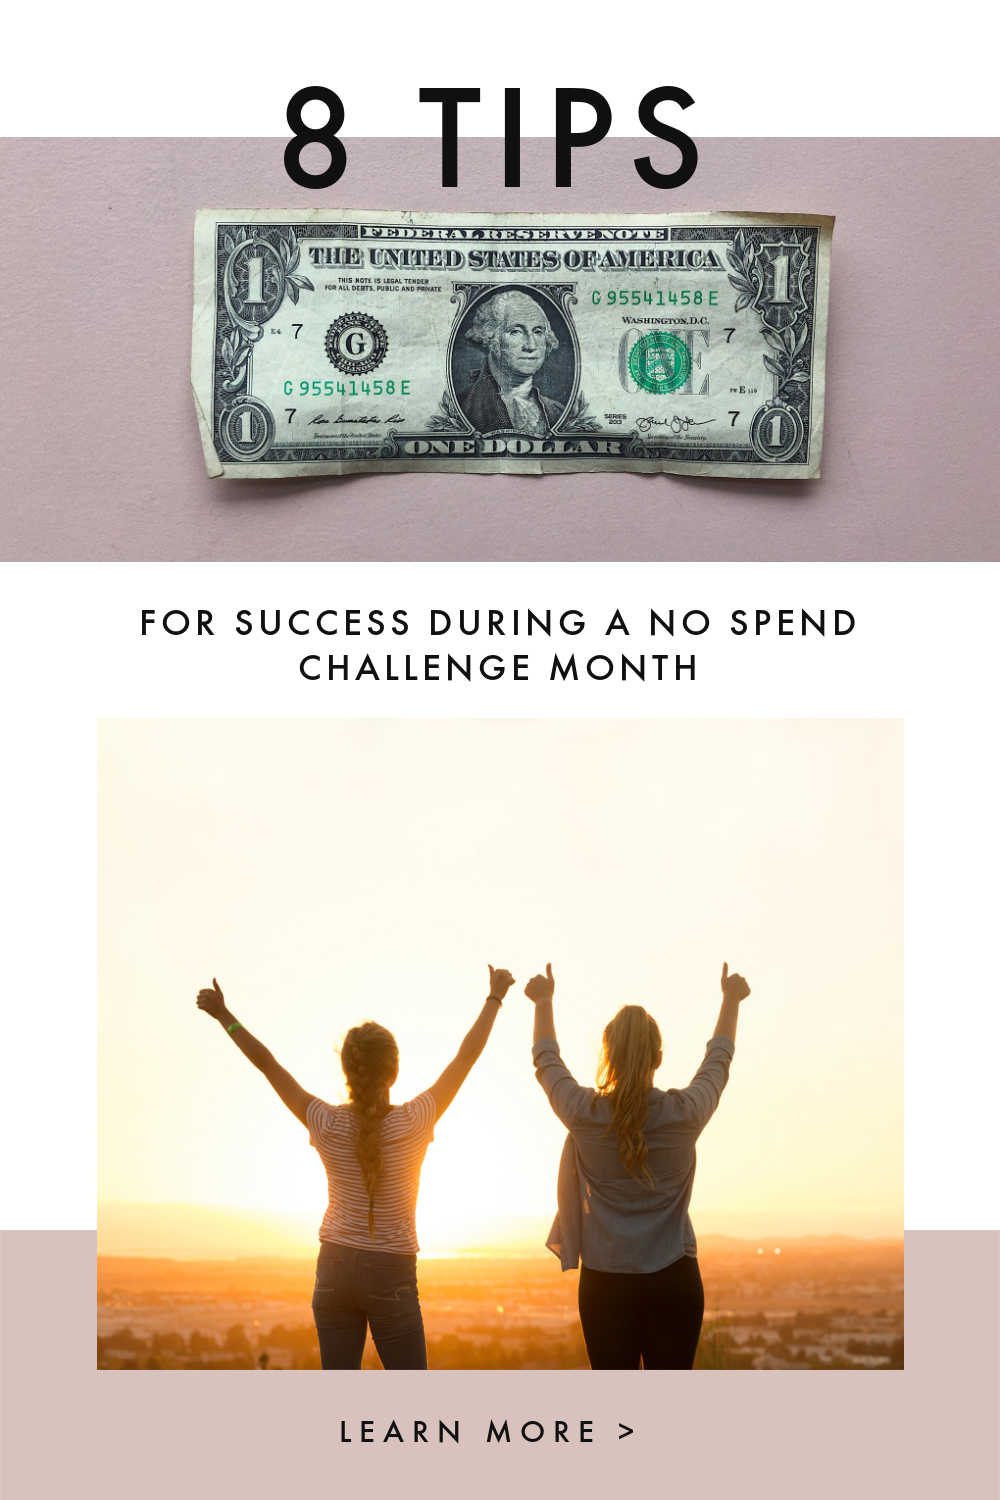 8 tips for success with no spend challenge